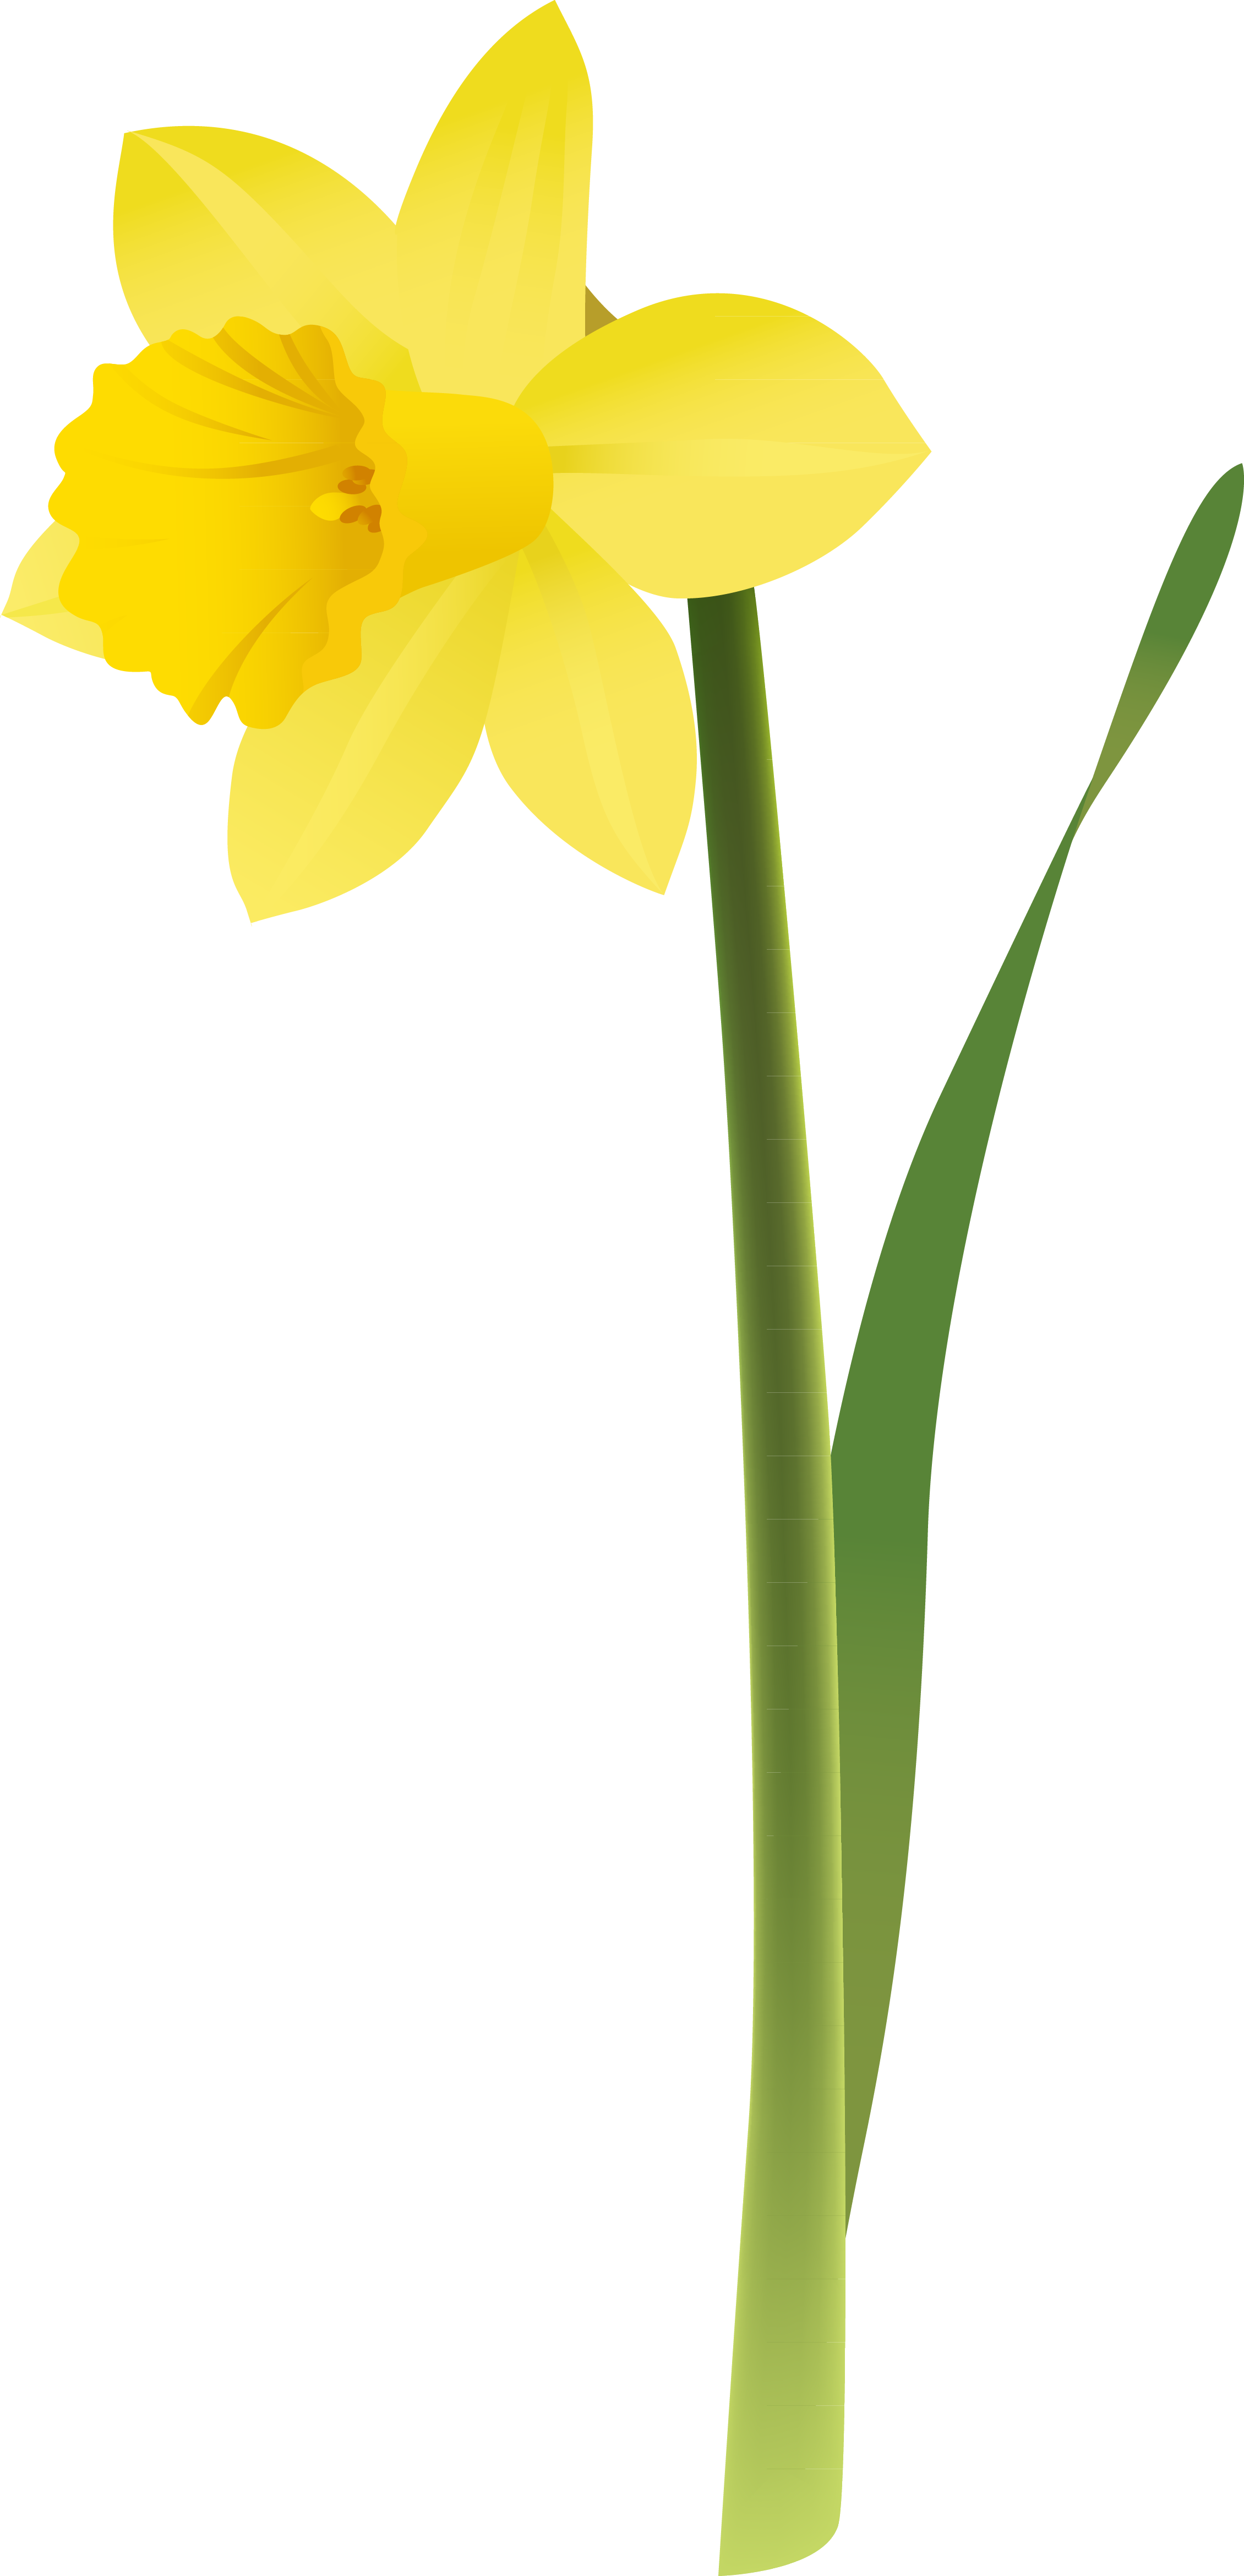 Yellow Narcissus Flower Illustration PNG